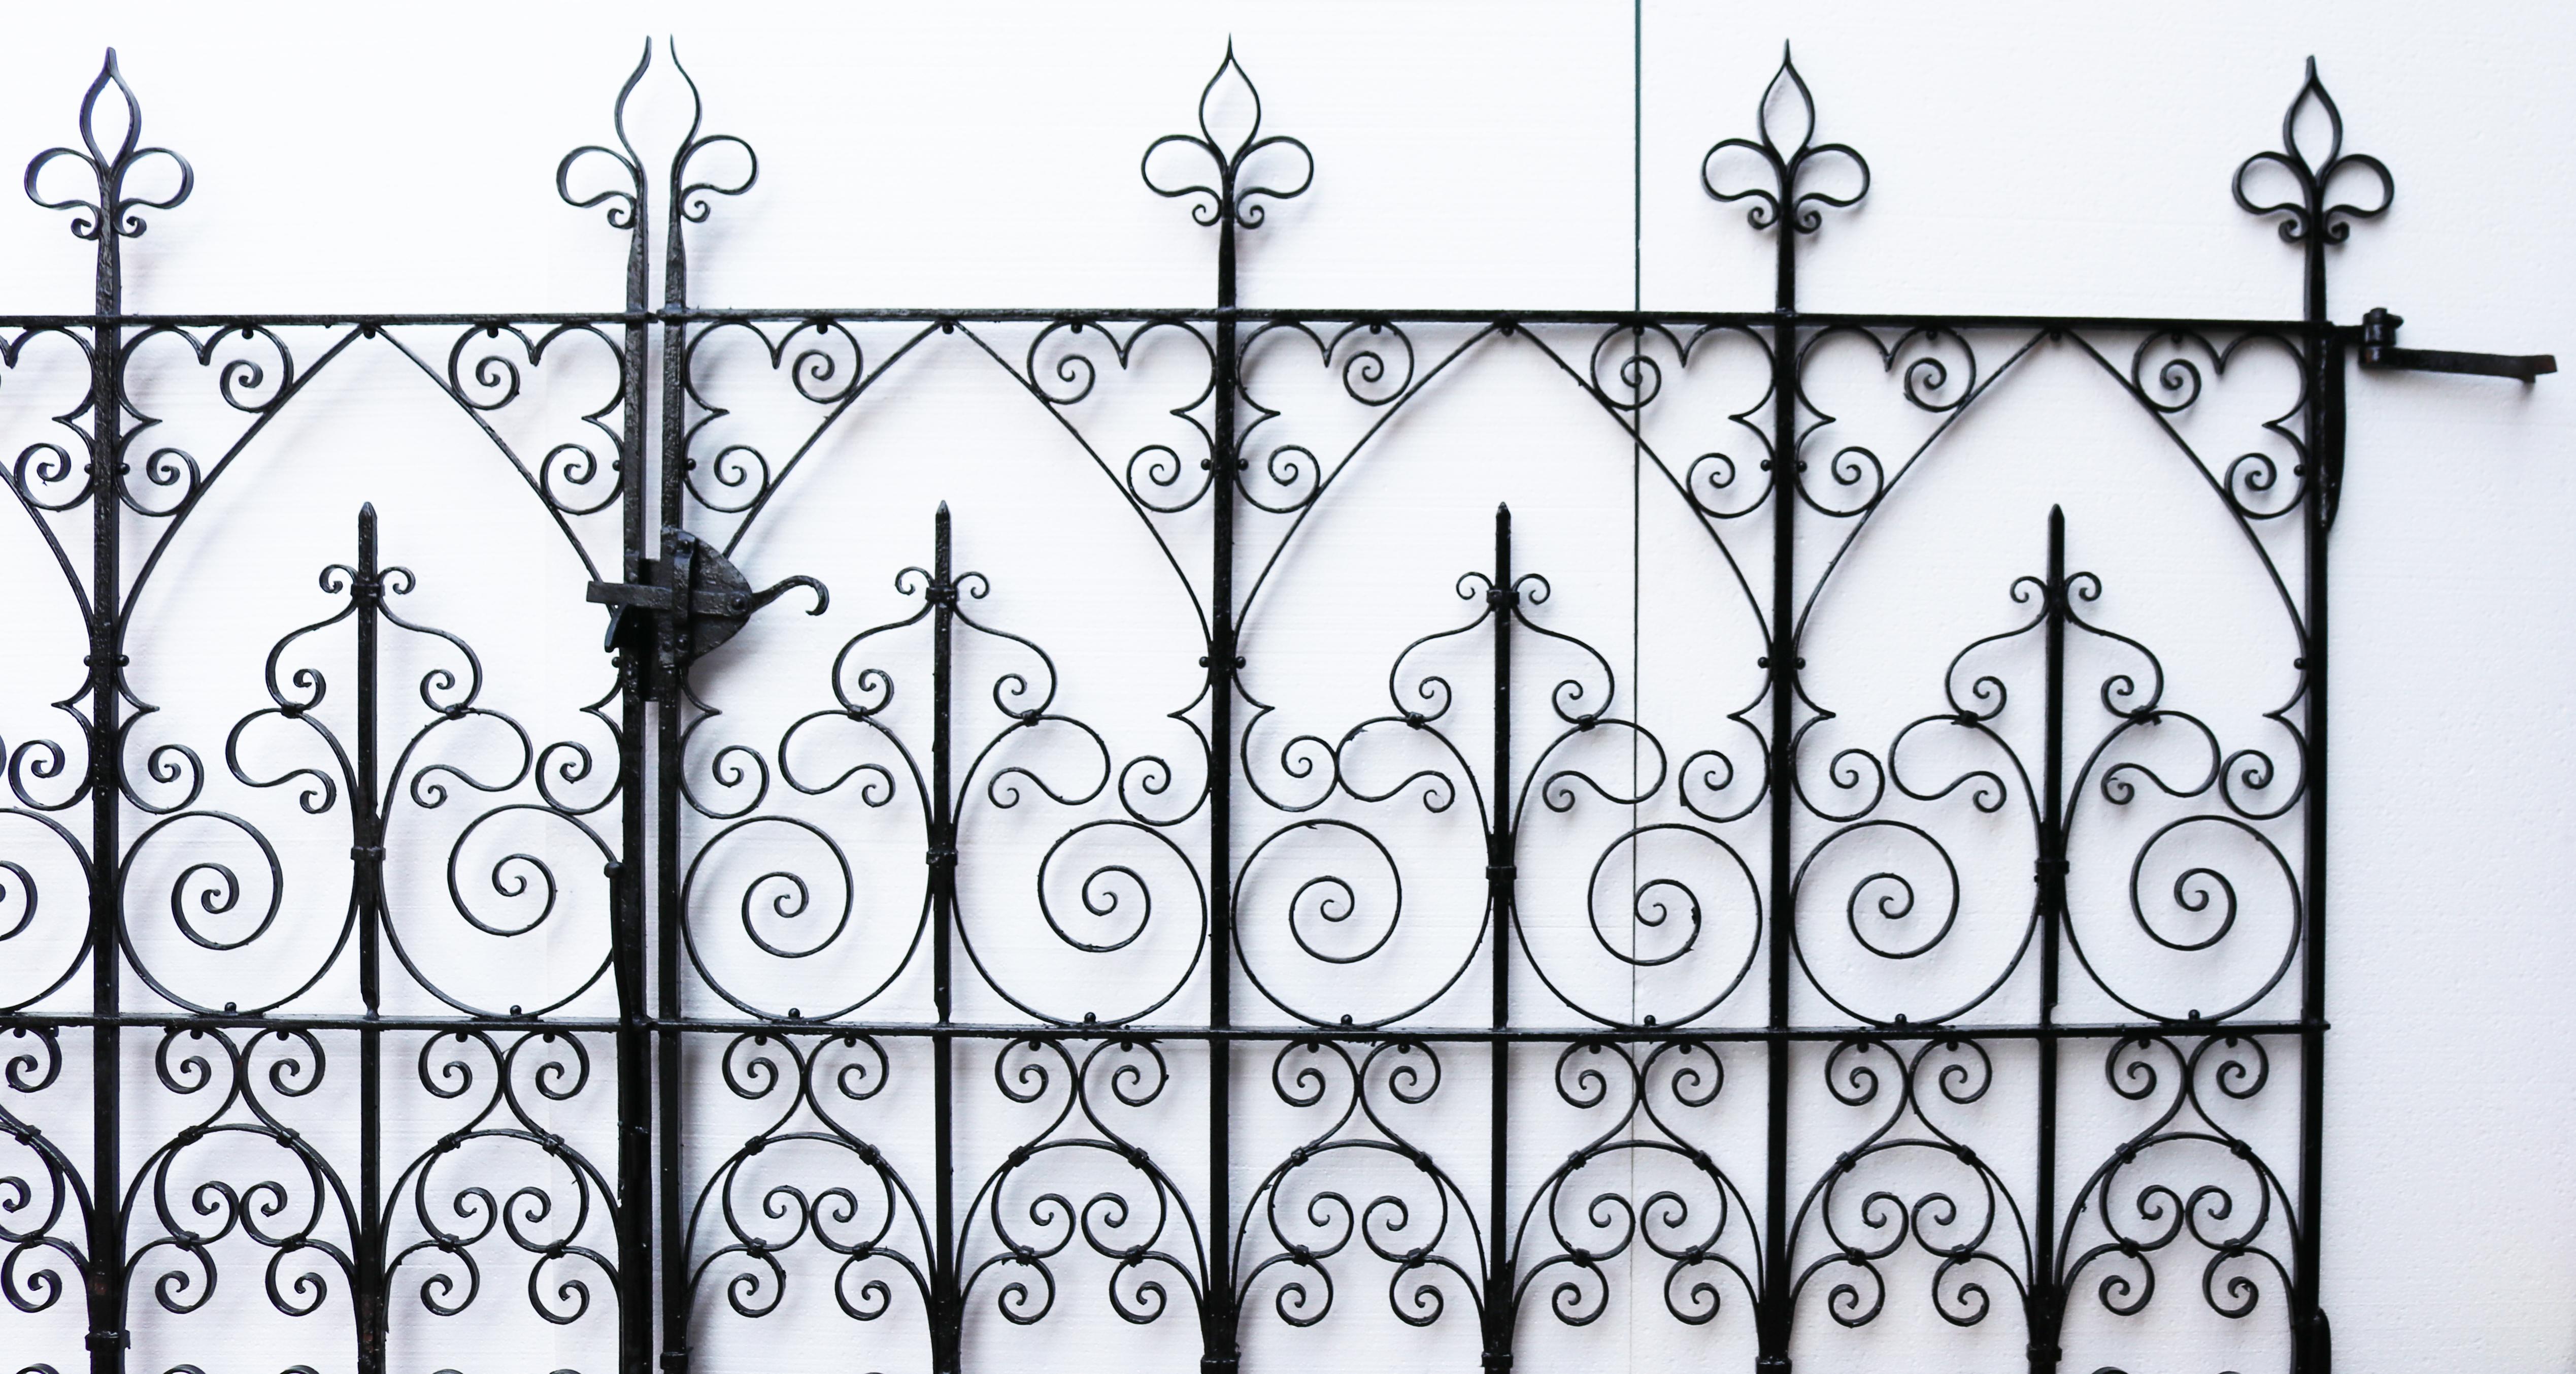 A pair of antique wrought iron driveway gates featuring an intricate scrolling pattern.

Additional Dimensions

To fit an opening of approximately 396 cm (13 feet)